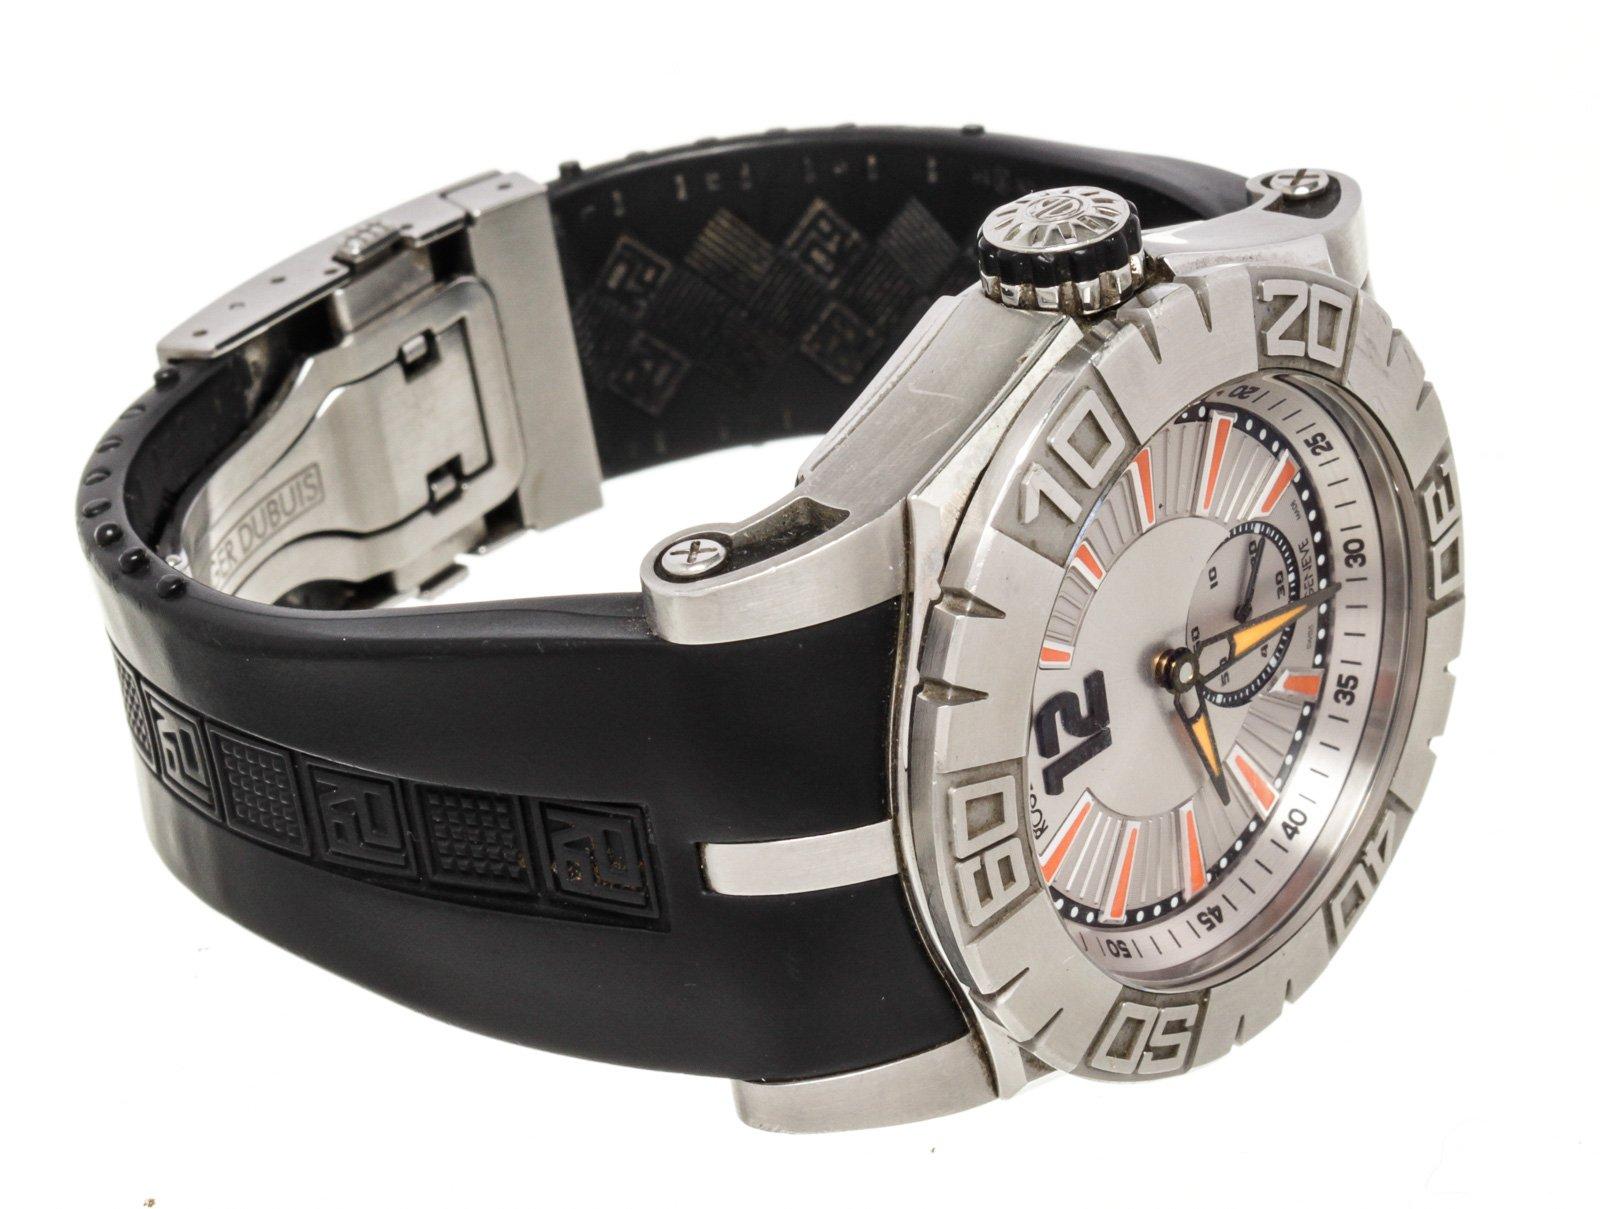 Roger Dubuis Black Leather Easy Diver Watch with leather, silver-tone hardware.

47252MSC